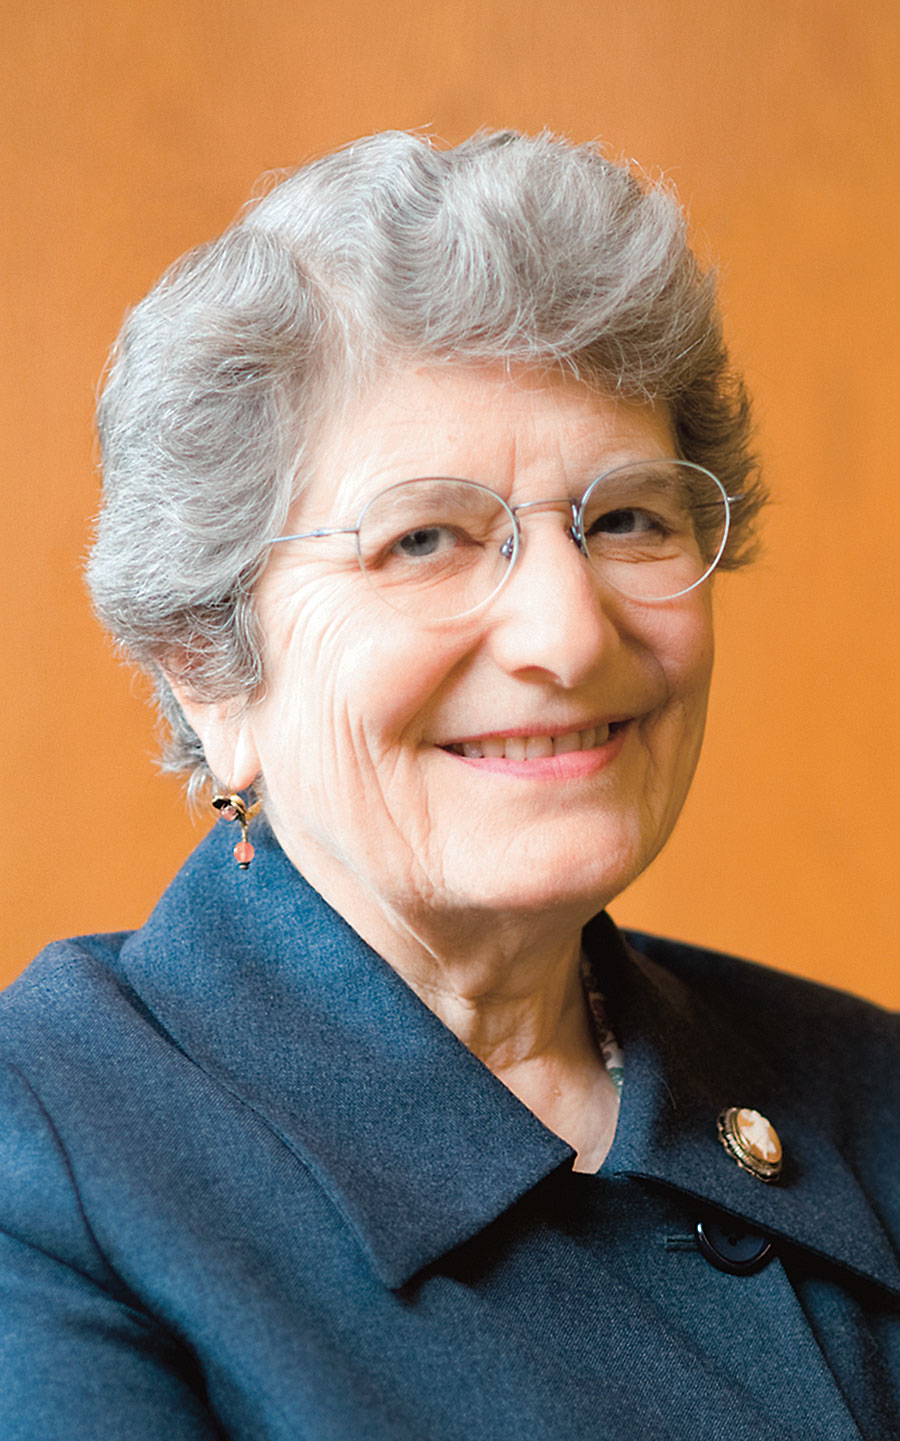 Portrait photo of a smiling Roberta Karmel wearing a navy coat, wireframe glasses, and orange jewelry against an orange background